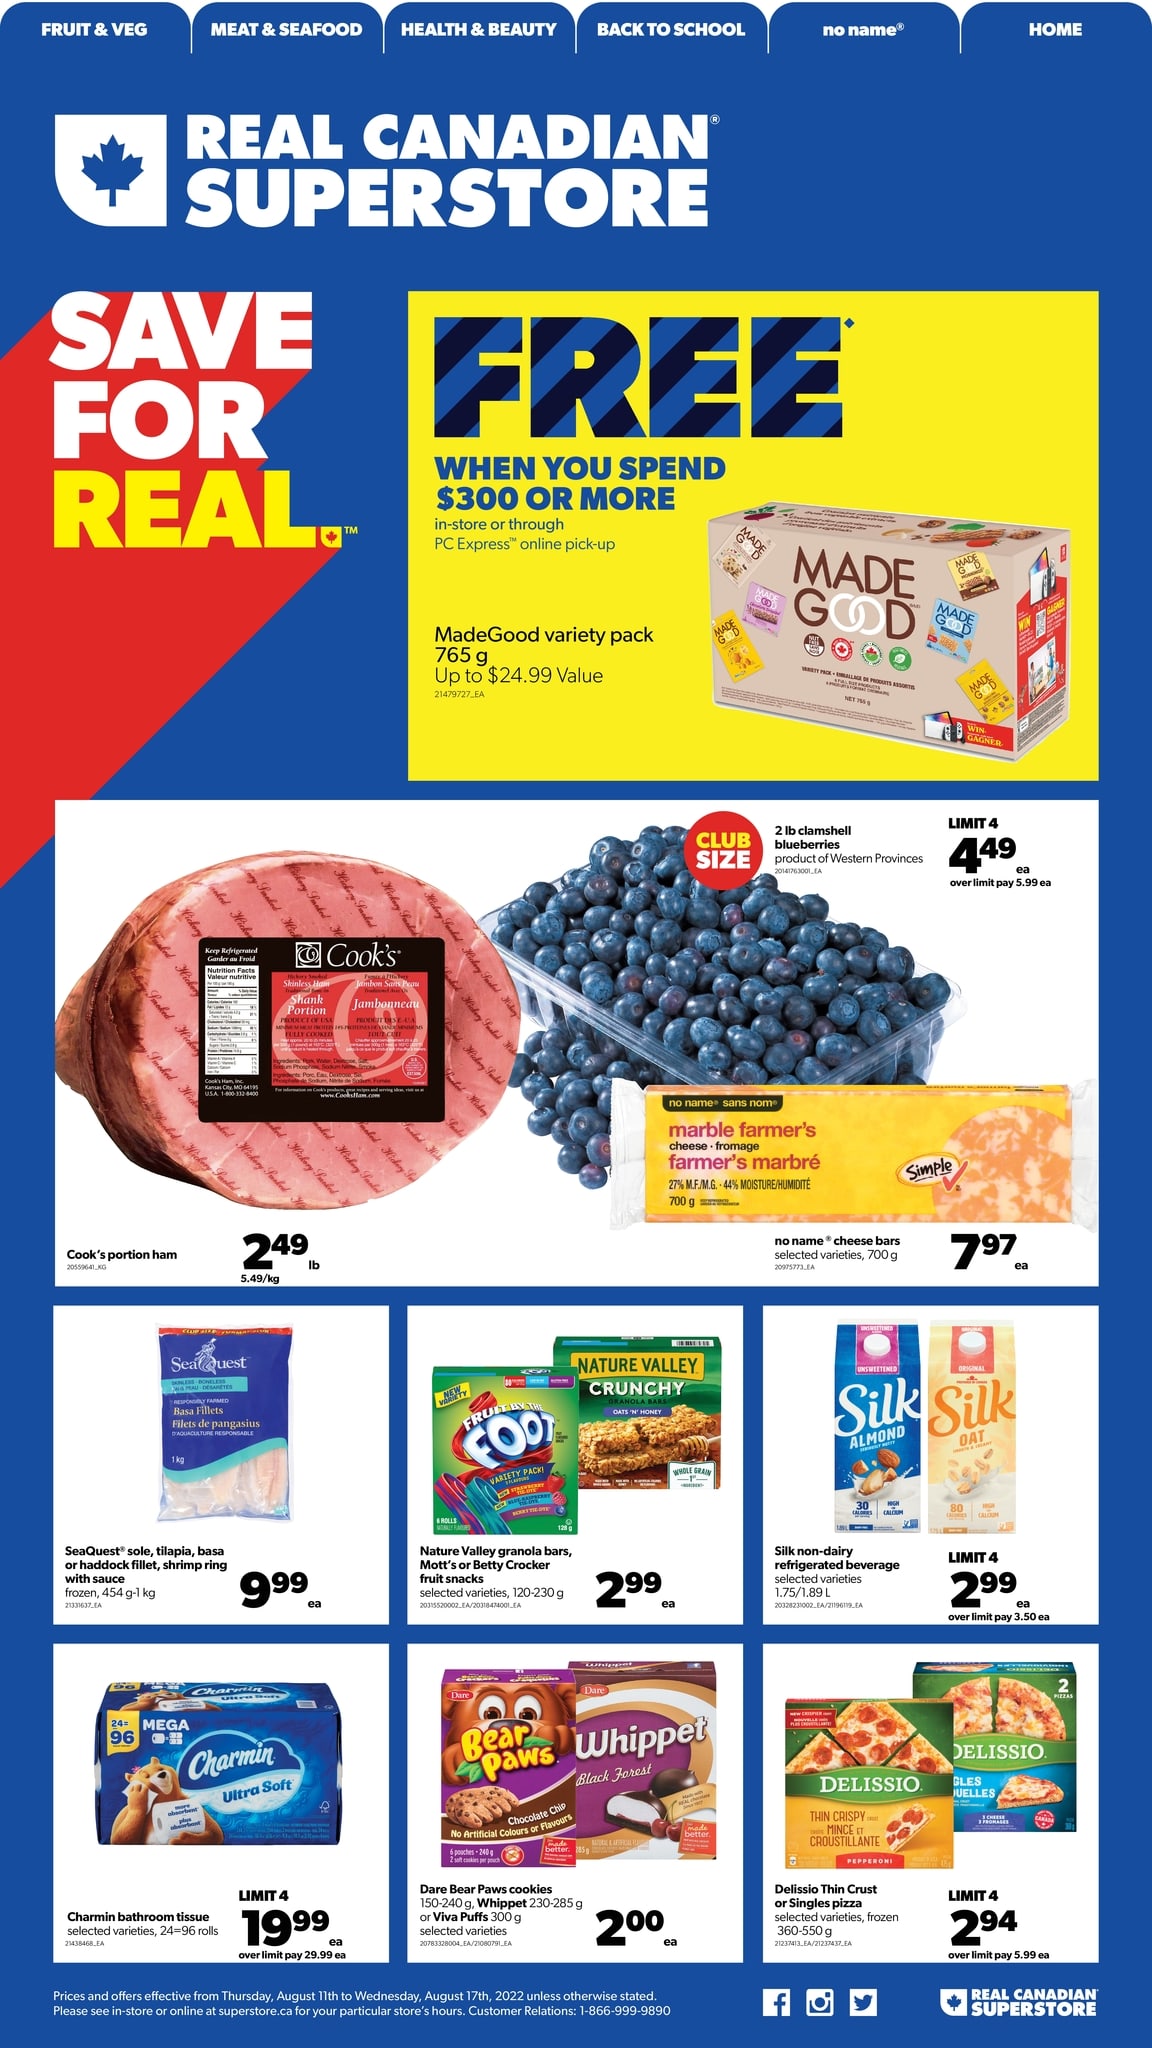 Real Canadian Superstore Western Canada - Weekly Flyer Specials